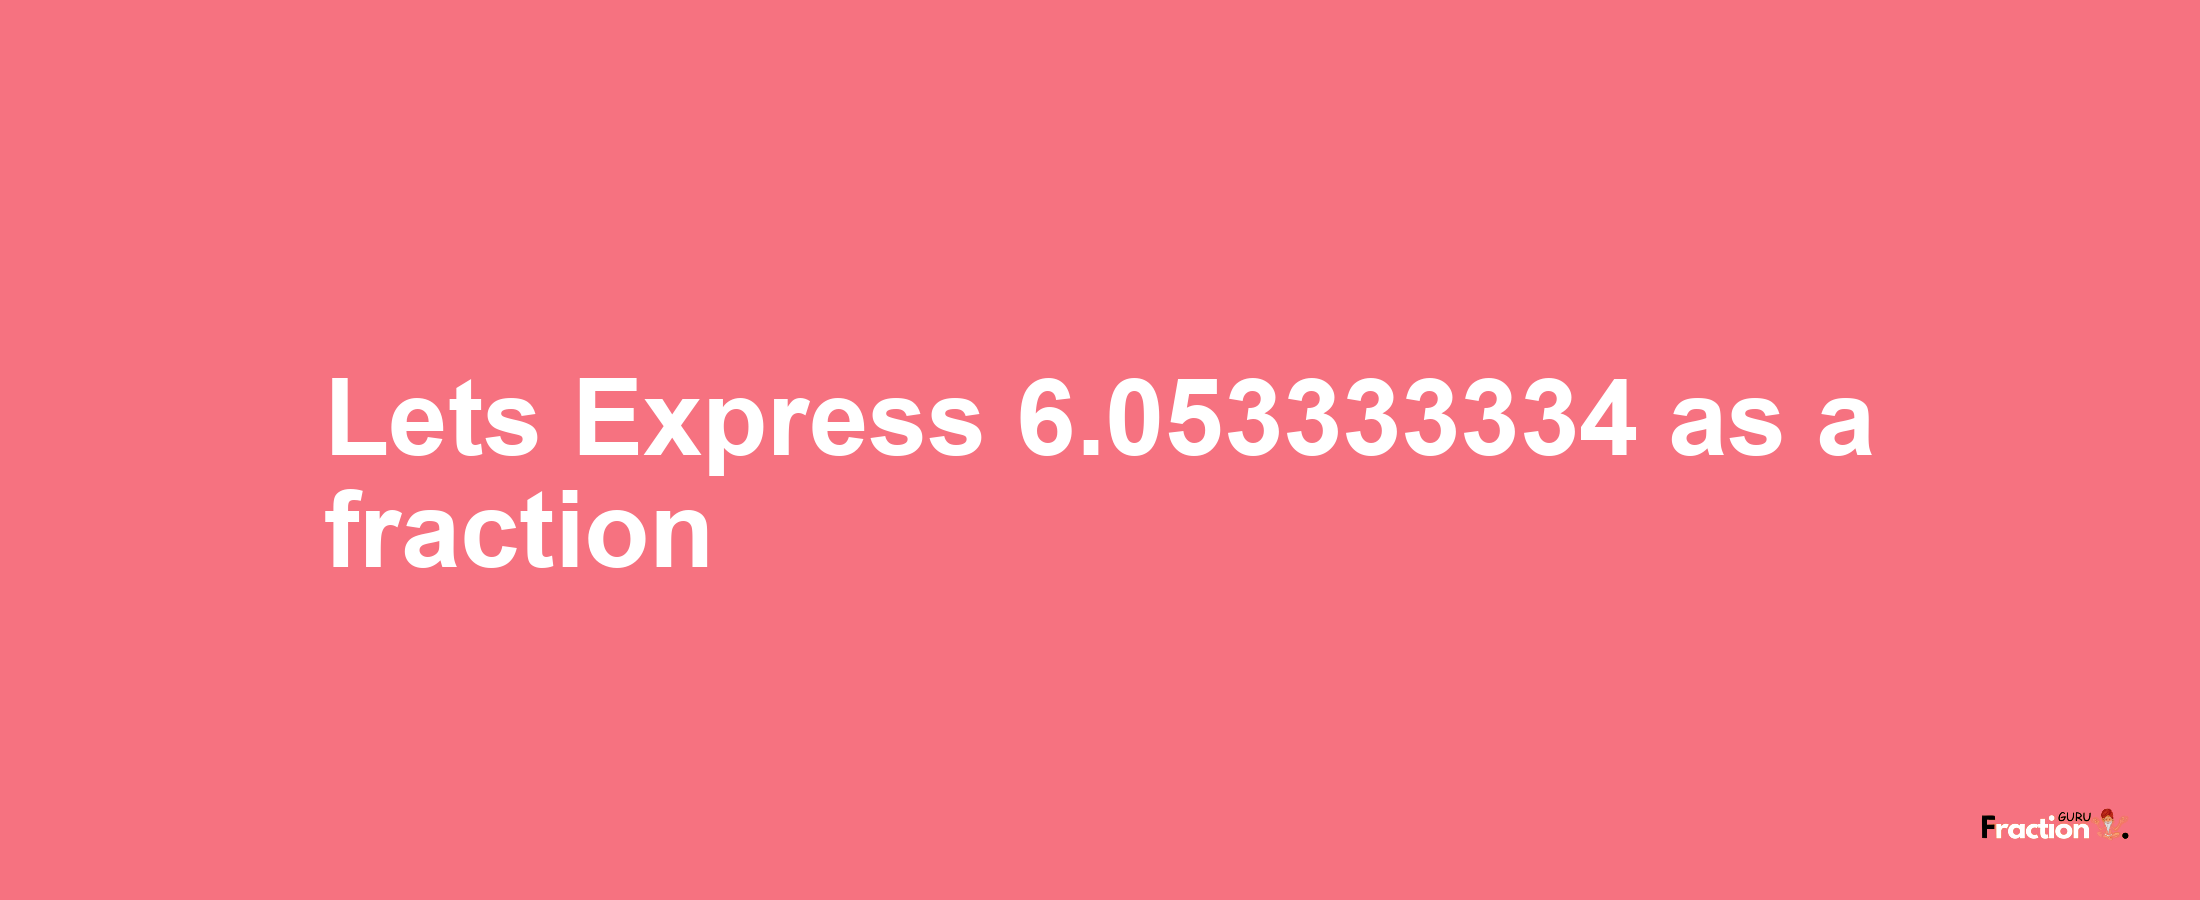 Lets Express 6.053333334 as afraction